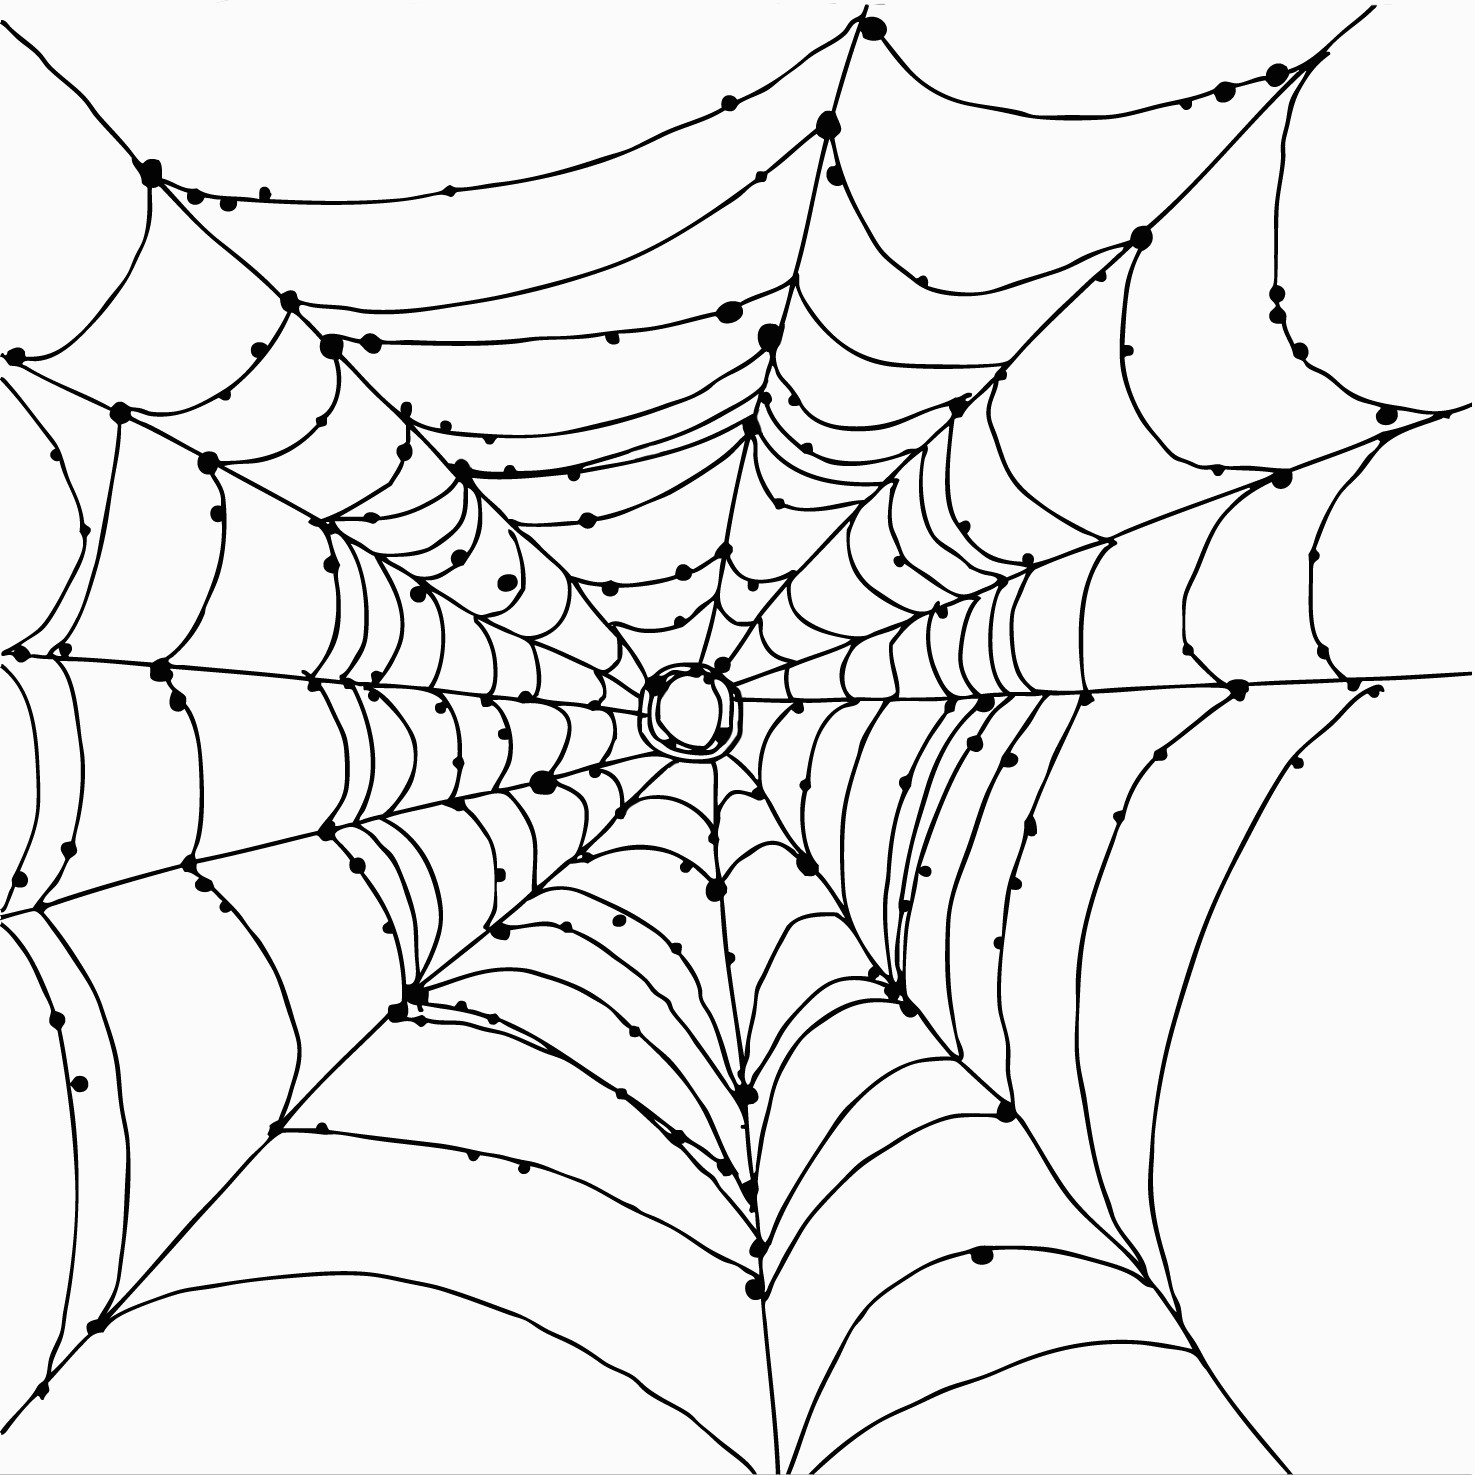 Free Printable Spider Web Coloring Pages For Kids For Coloring Pages - Free Printable Spider Web